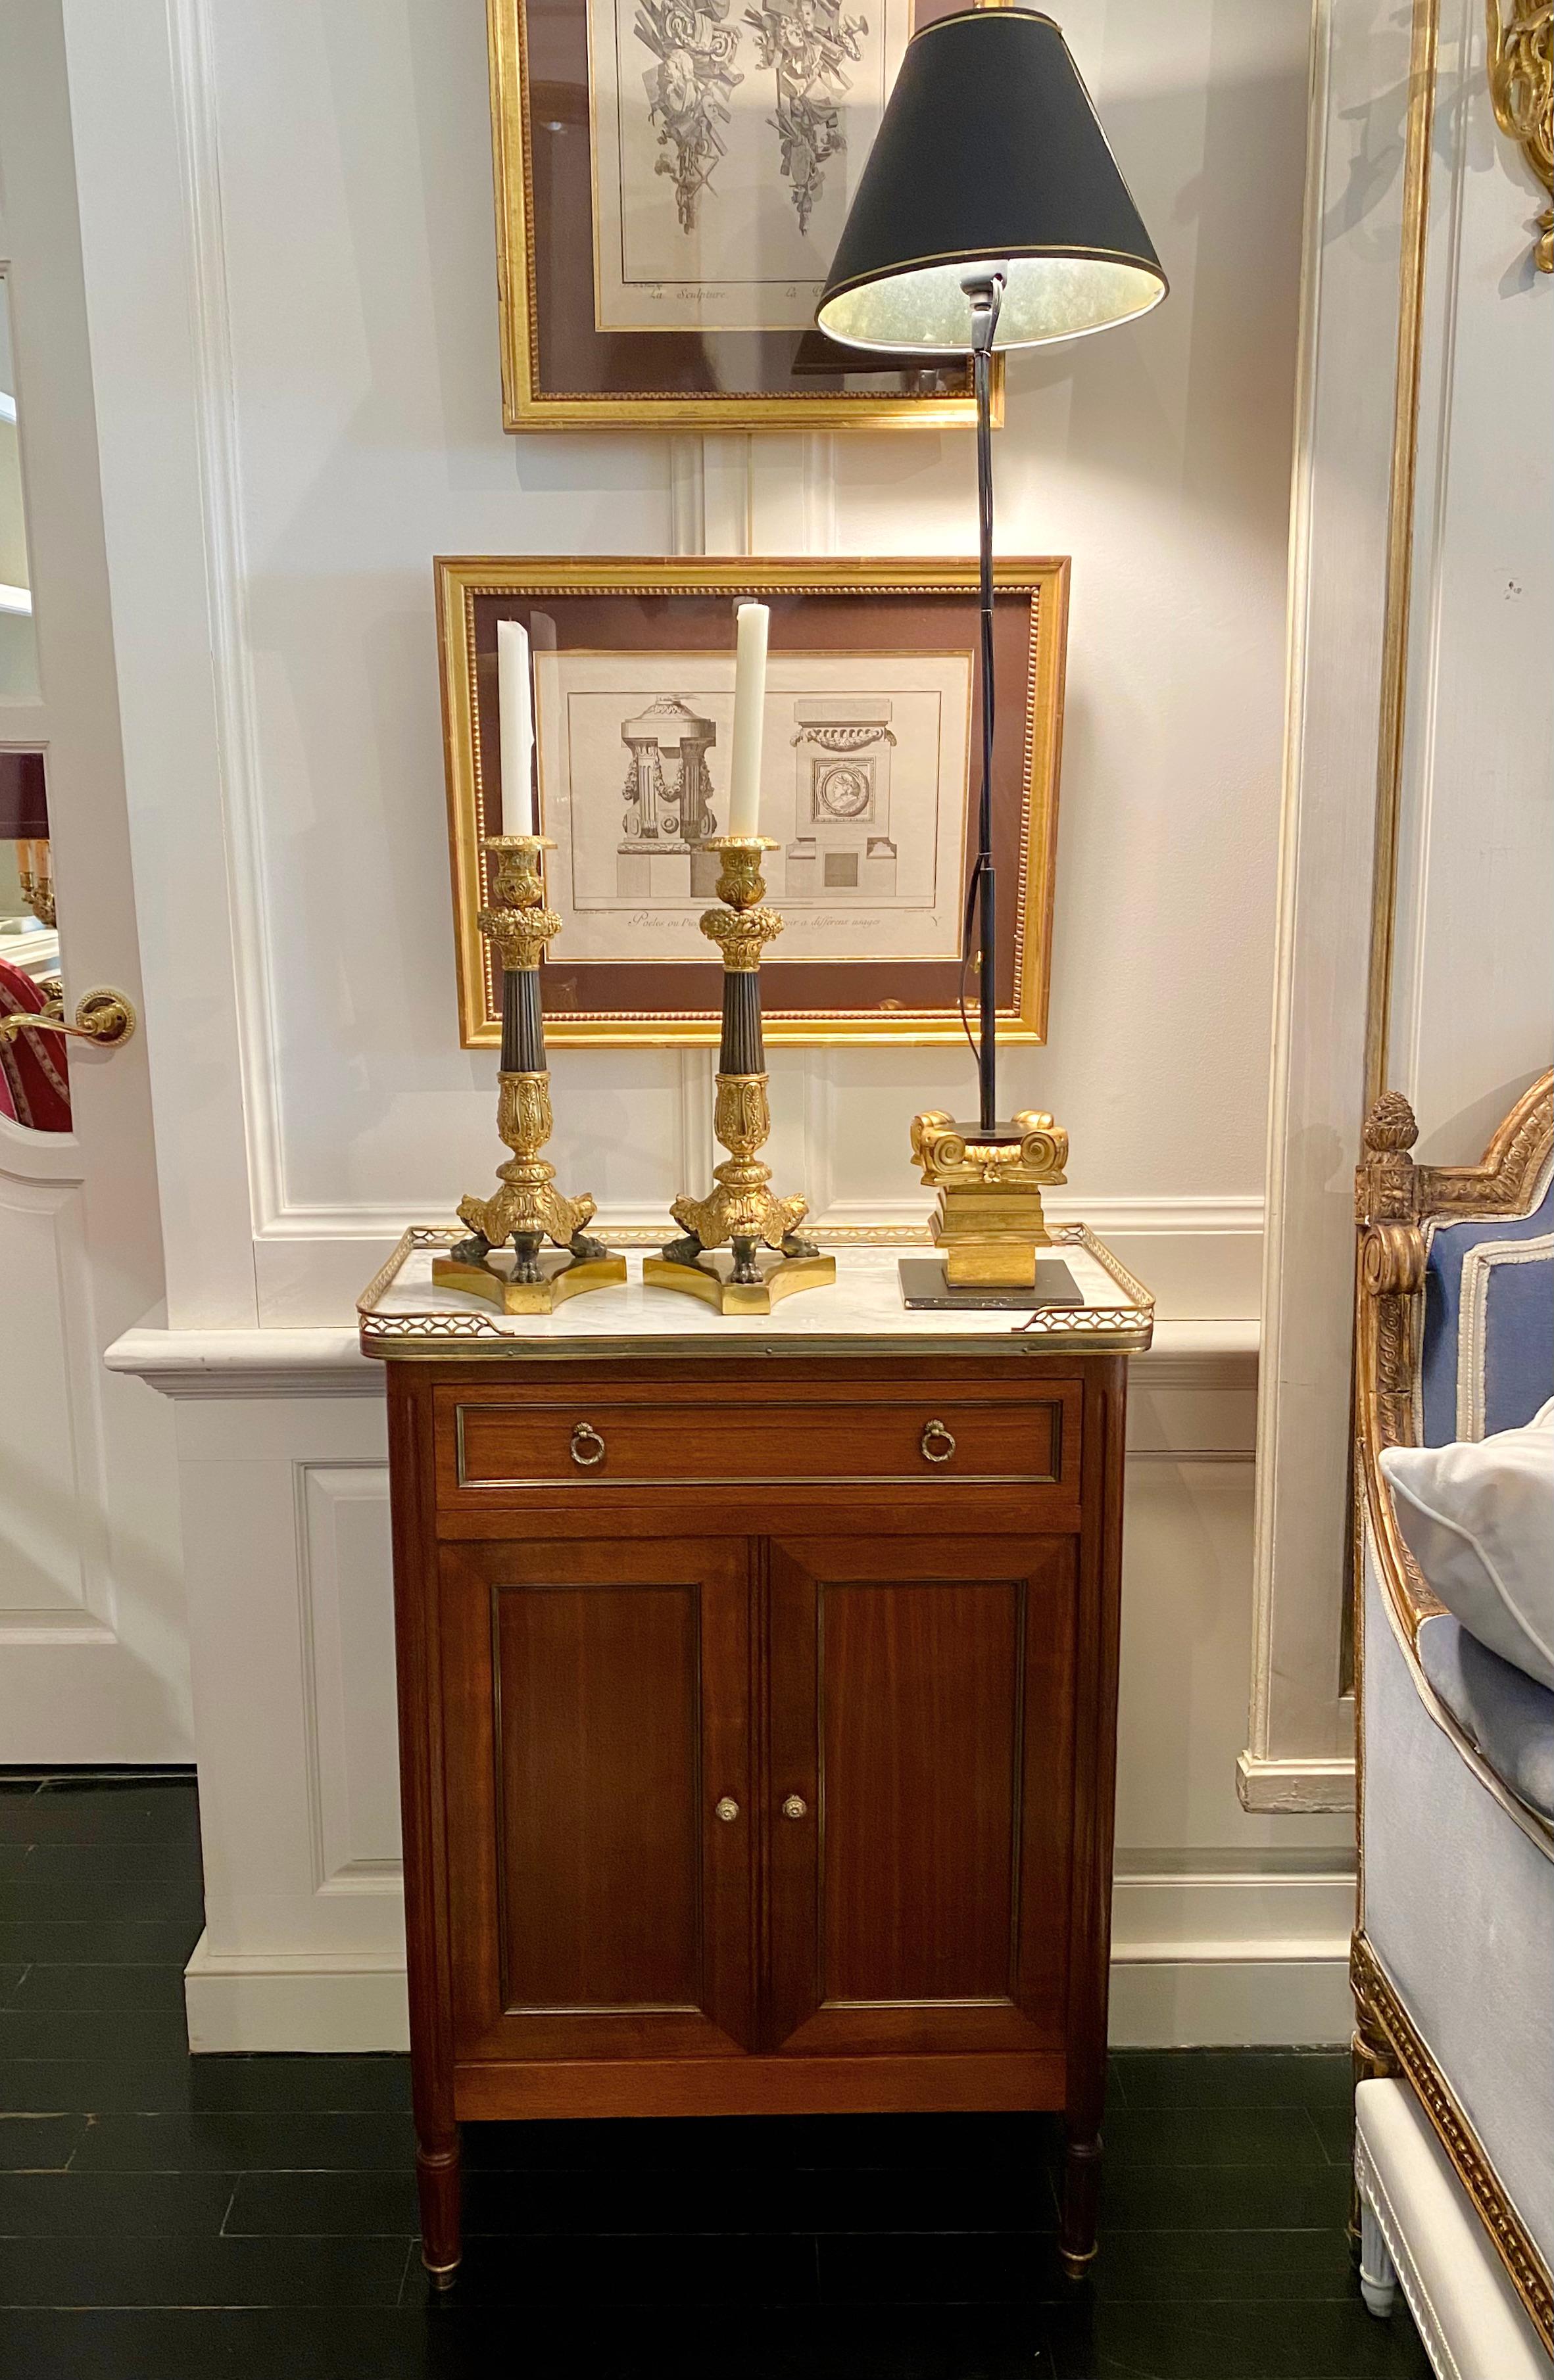 Louis XVI Style versatile cabinet or small cubboard with marble top and bronze gallery. Rectangular white marble top with rounded corners surrounded by a bronze pierced gallery. The cabinet has a drawer above a pair of doors opening unto shelves. It